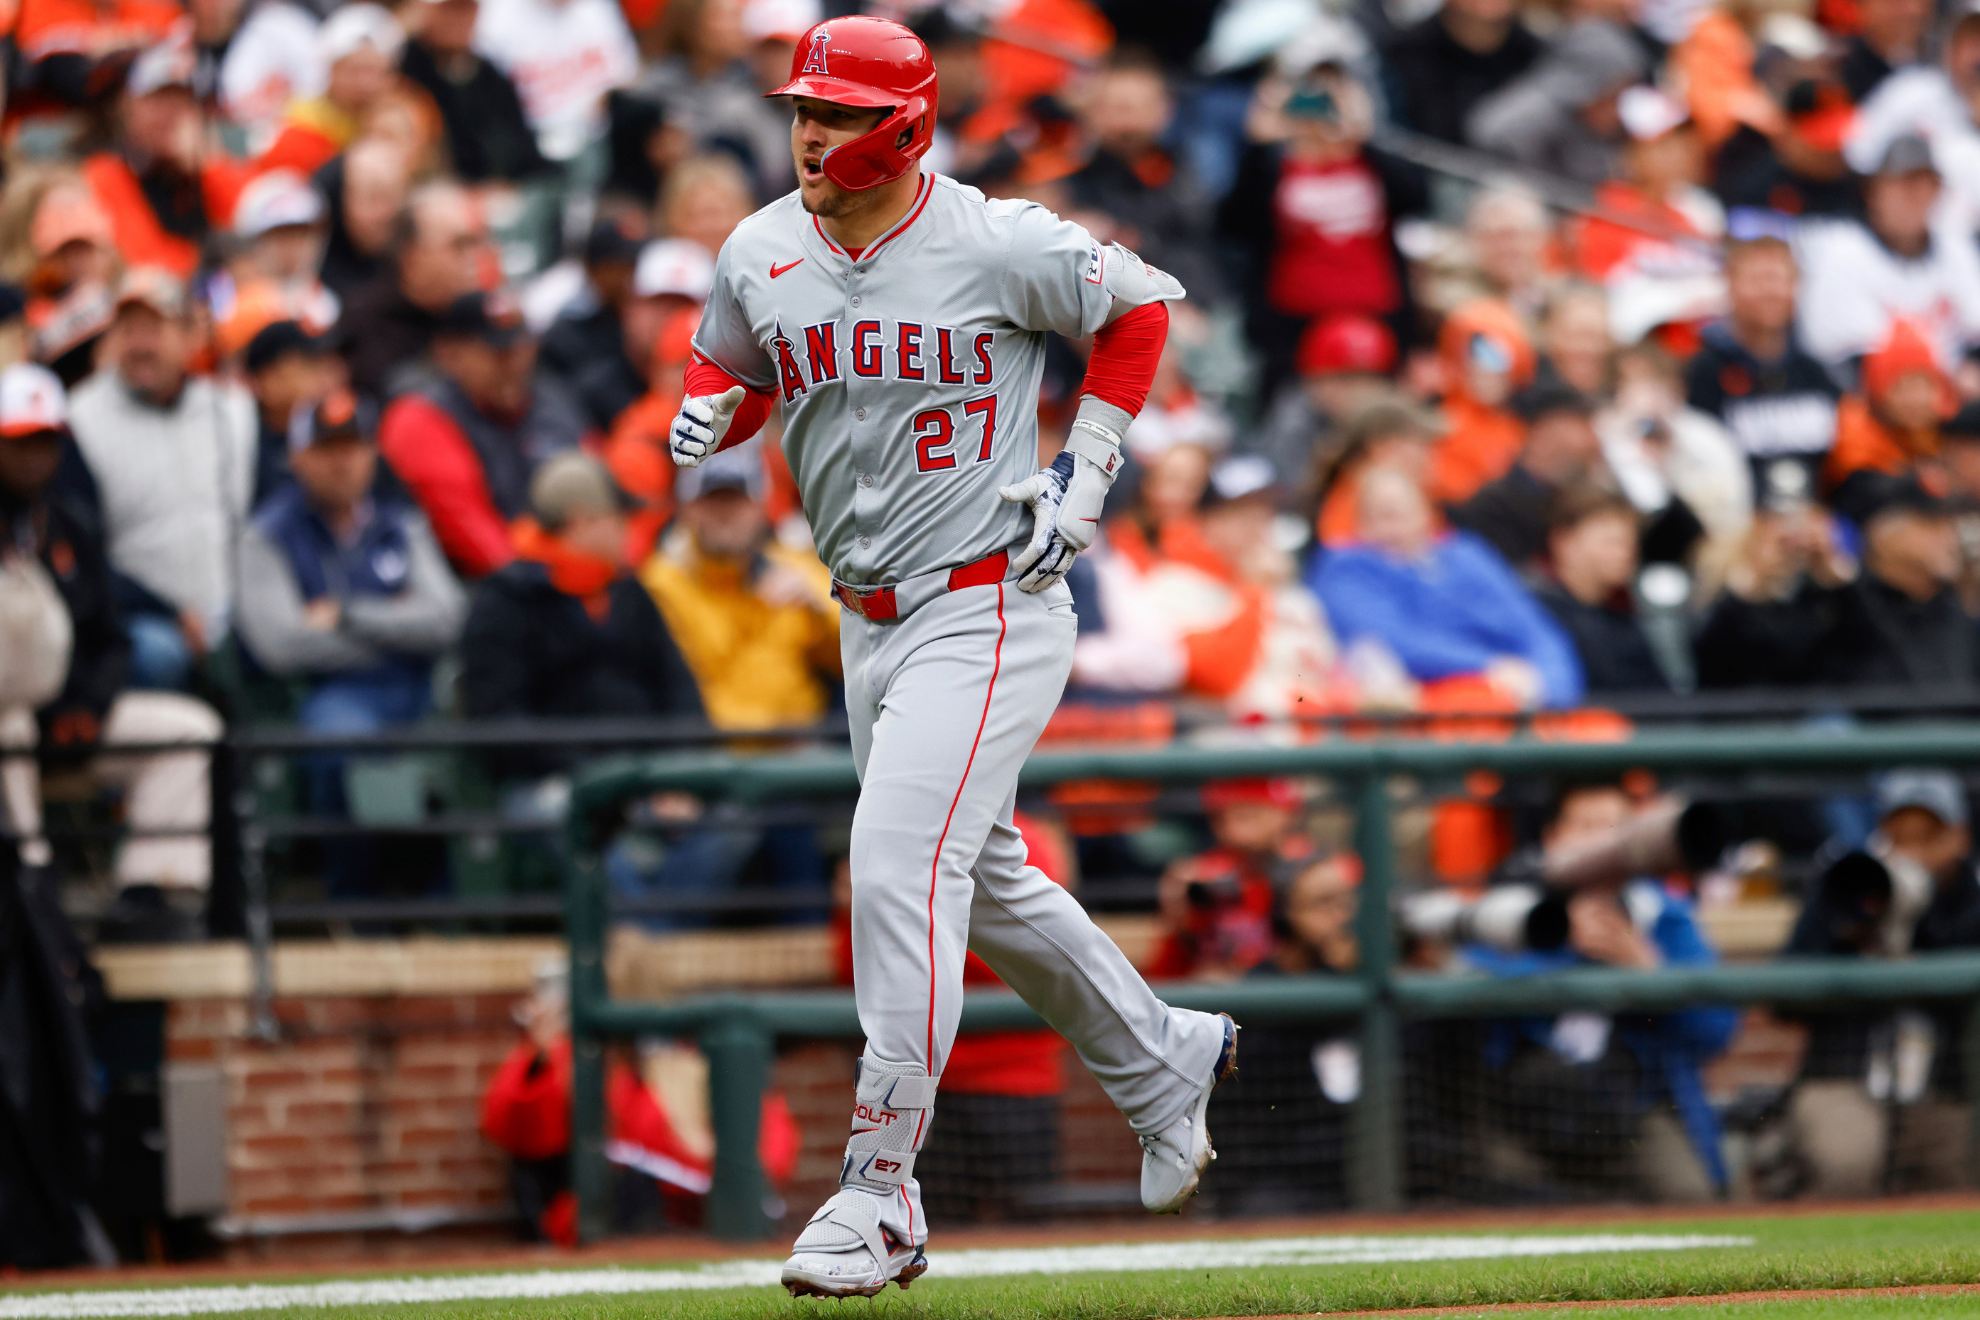 Trout rounds the bases following his Opening Day home run.